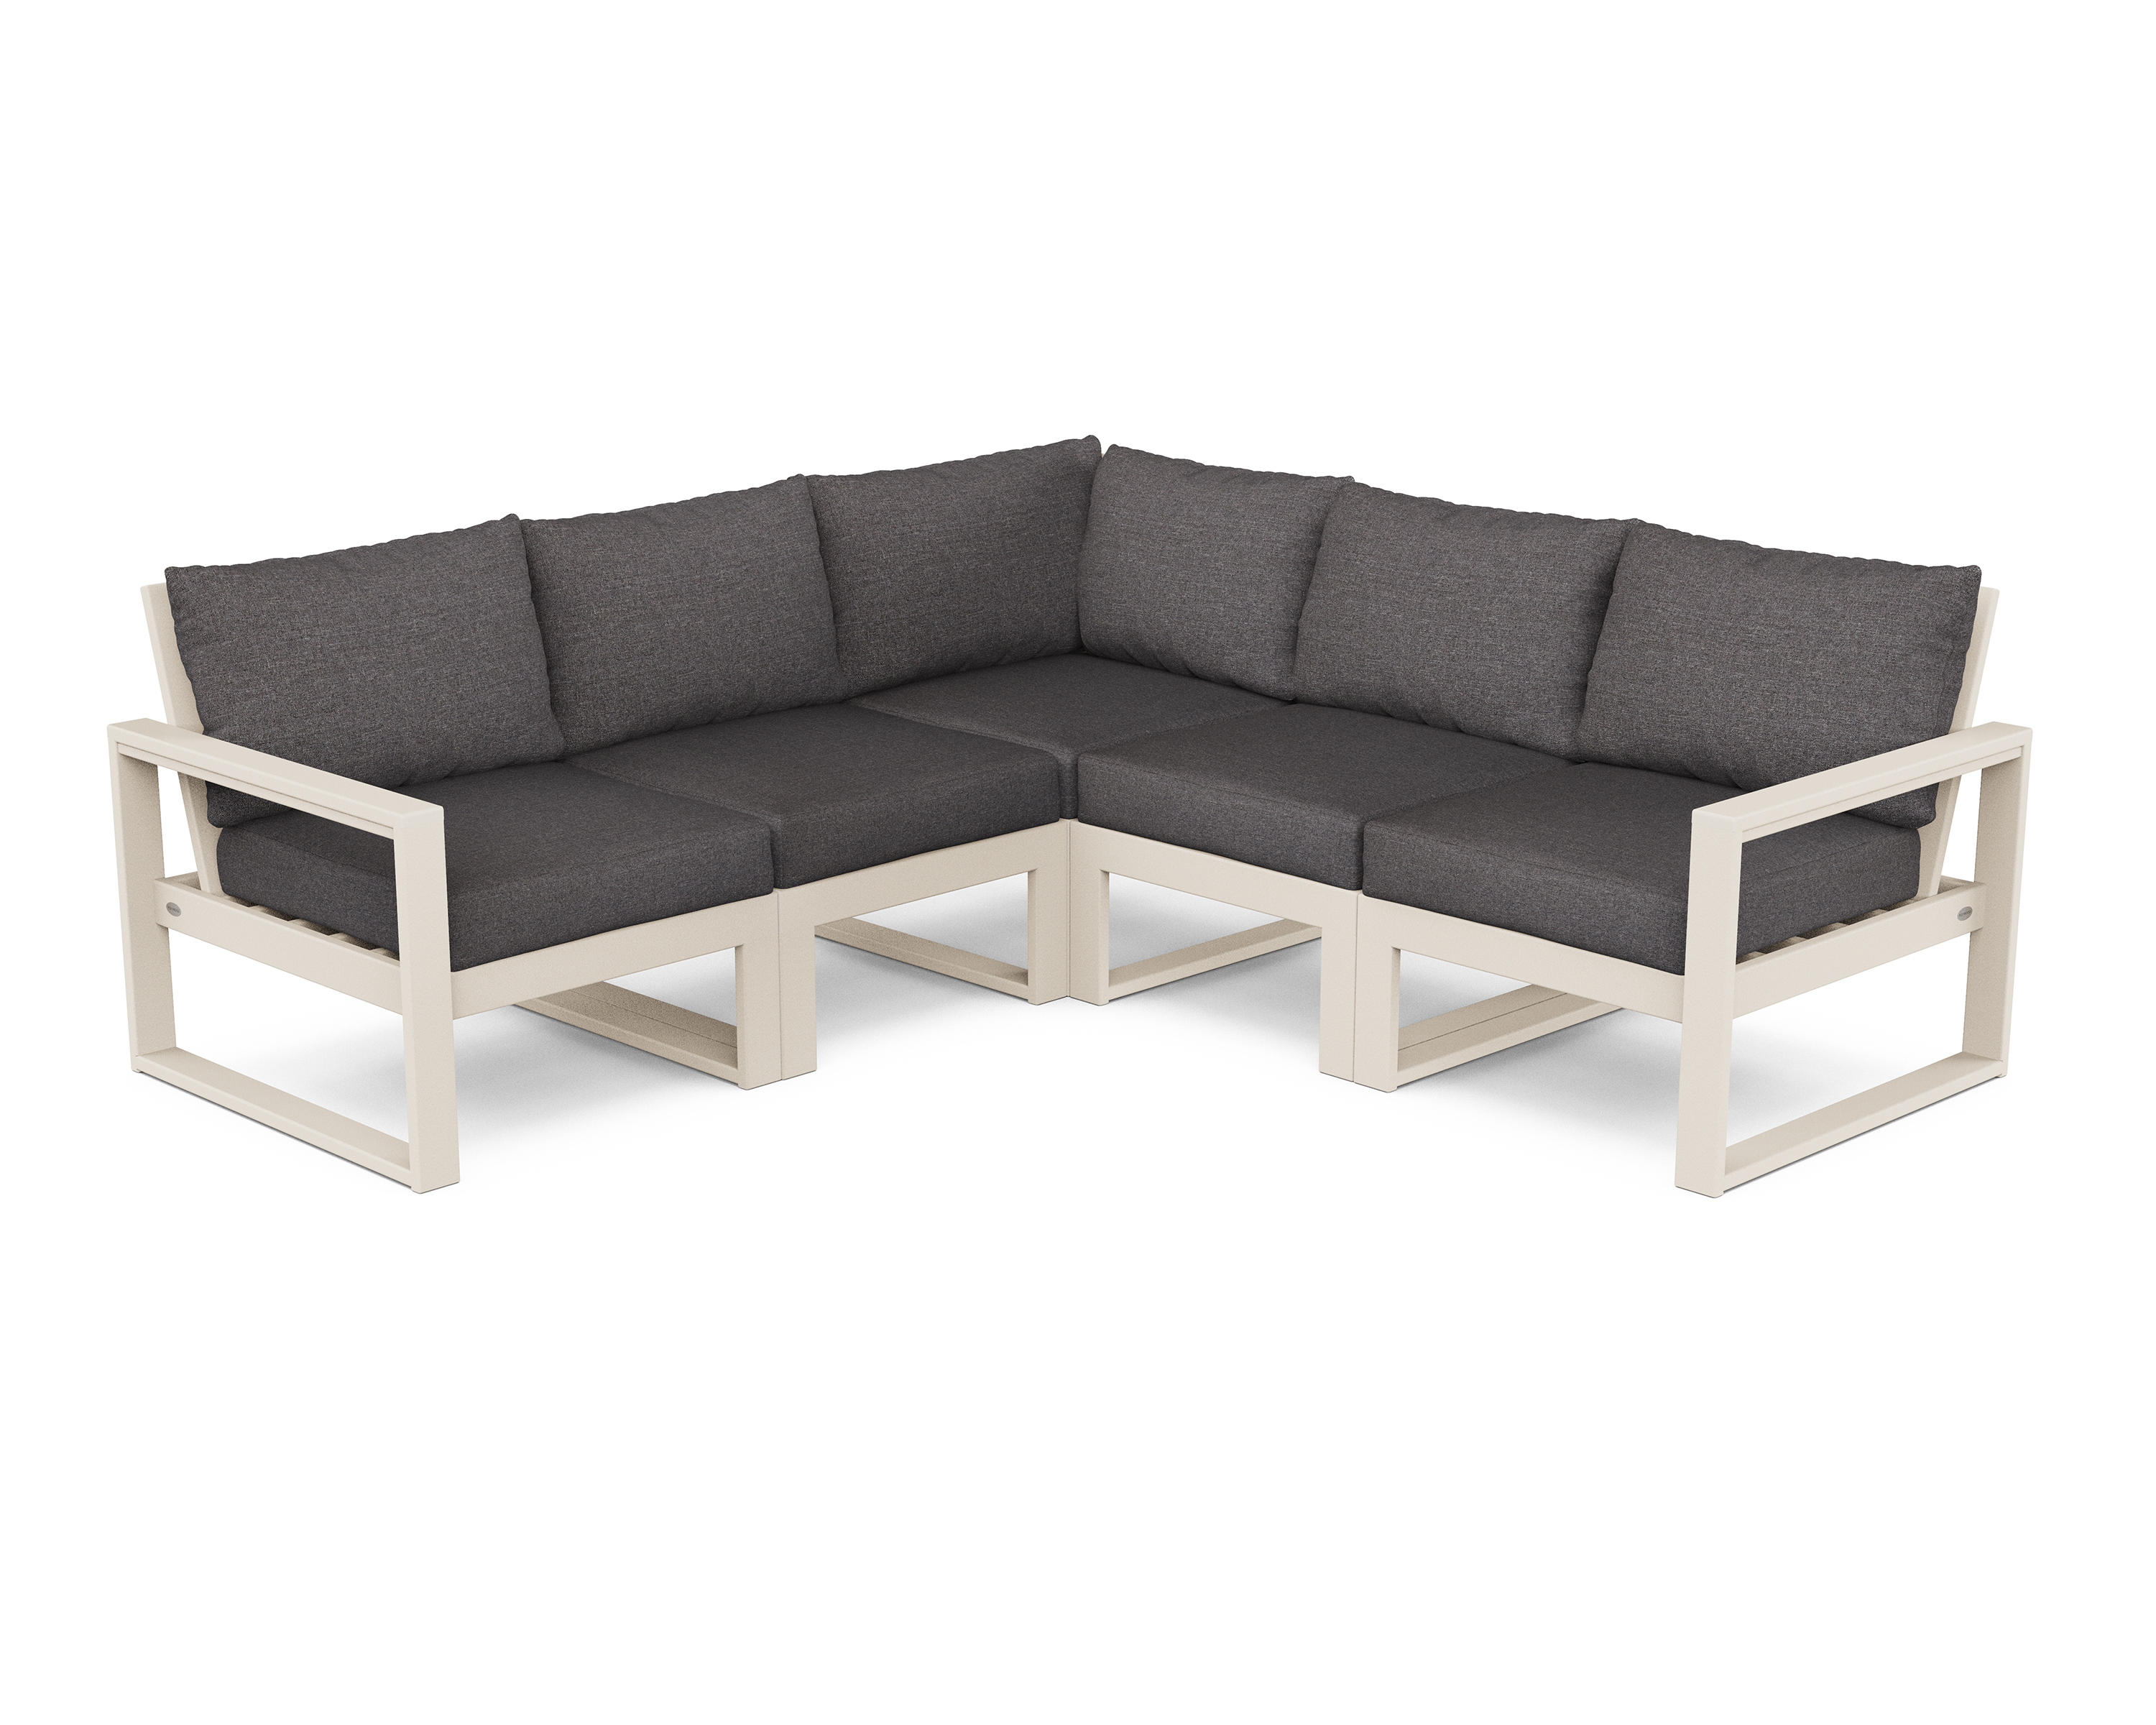 edge 5-piece modular deep seating set in sand / ash charcoal product image